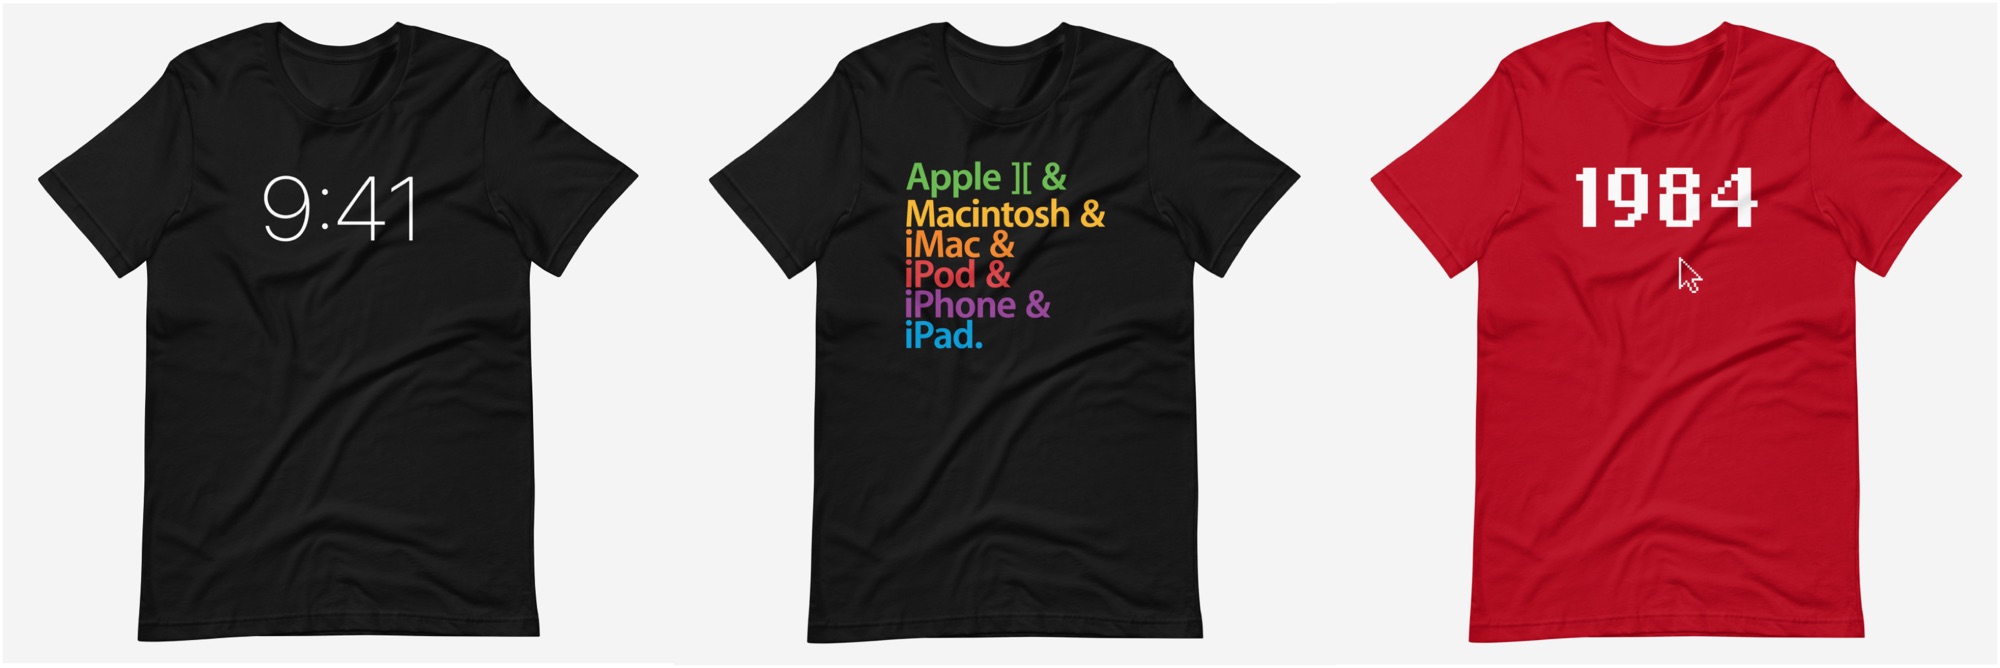 MacRumors Giveaway: Win an Apple-Themed T-Shirt or Hat From Throwboy